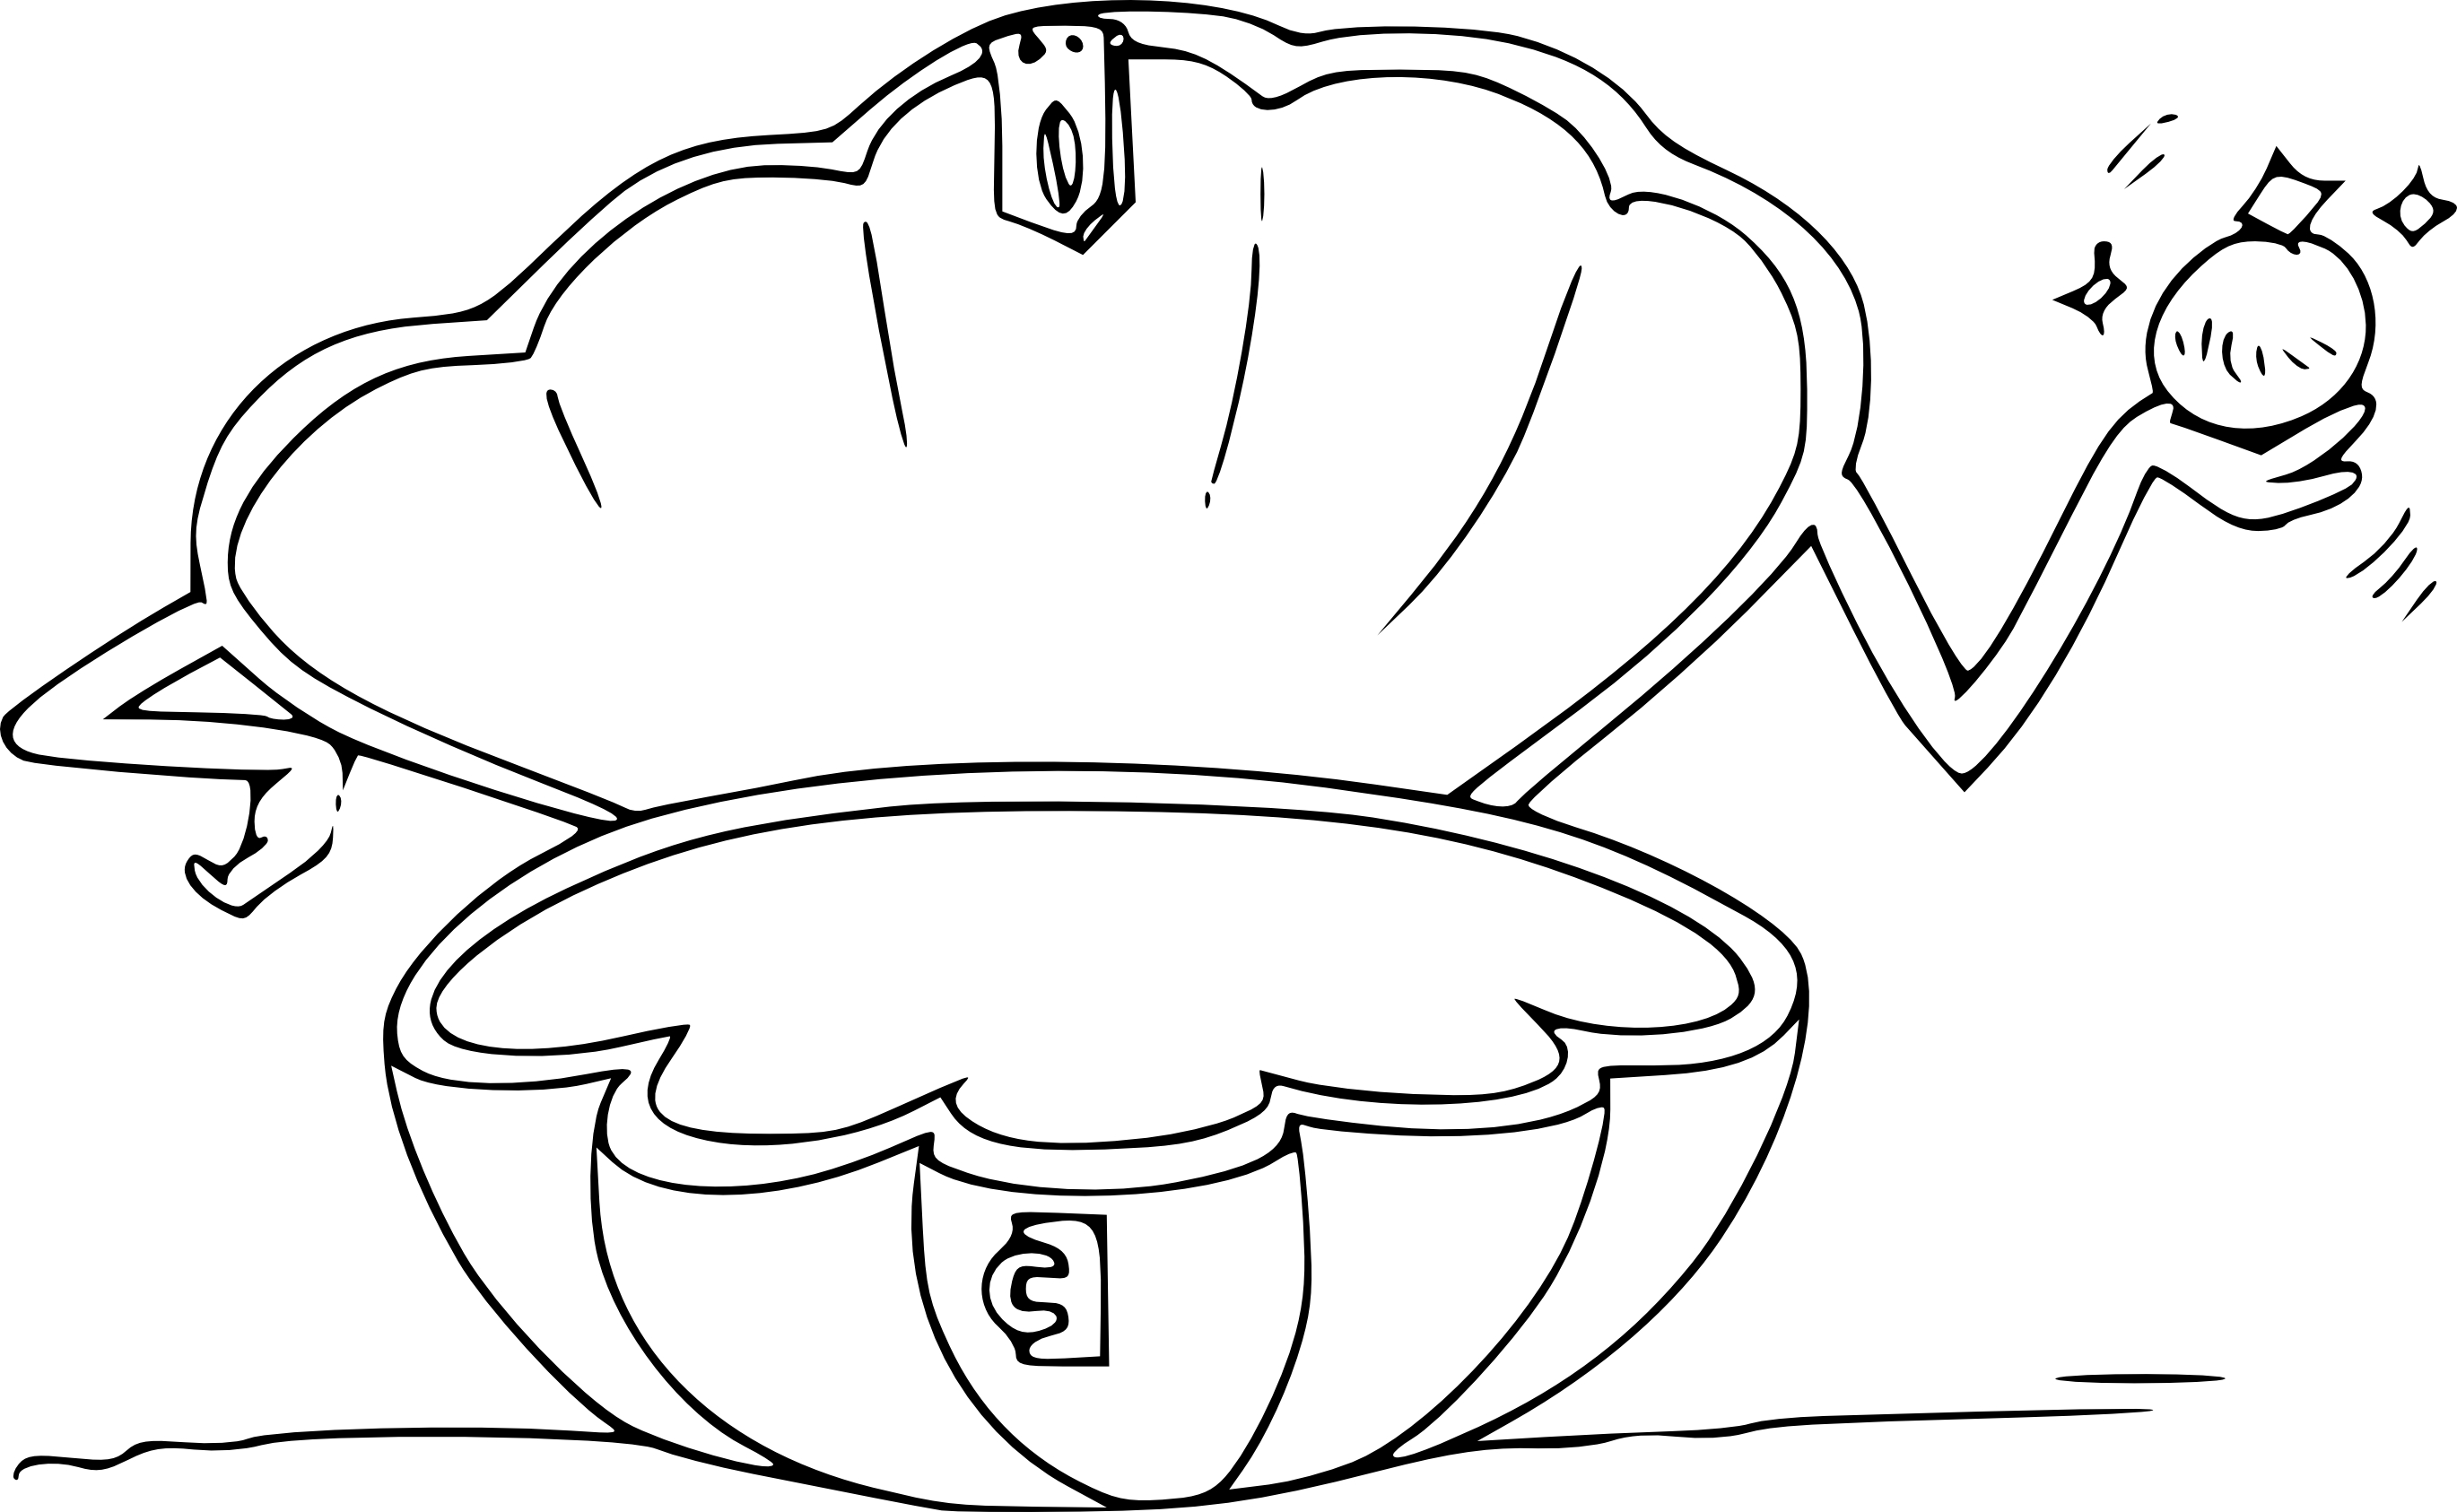 Open Shell coloring page